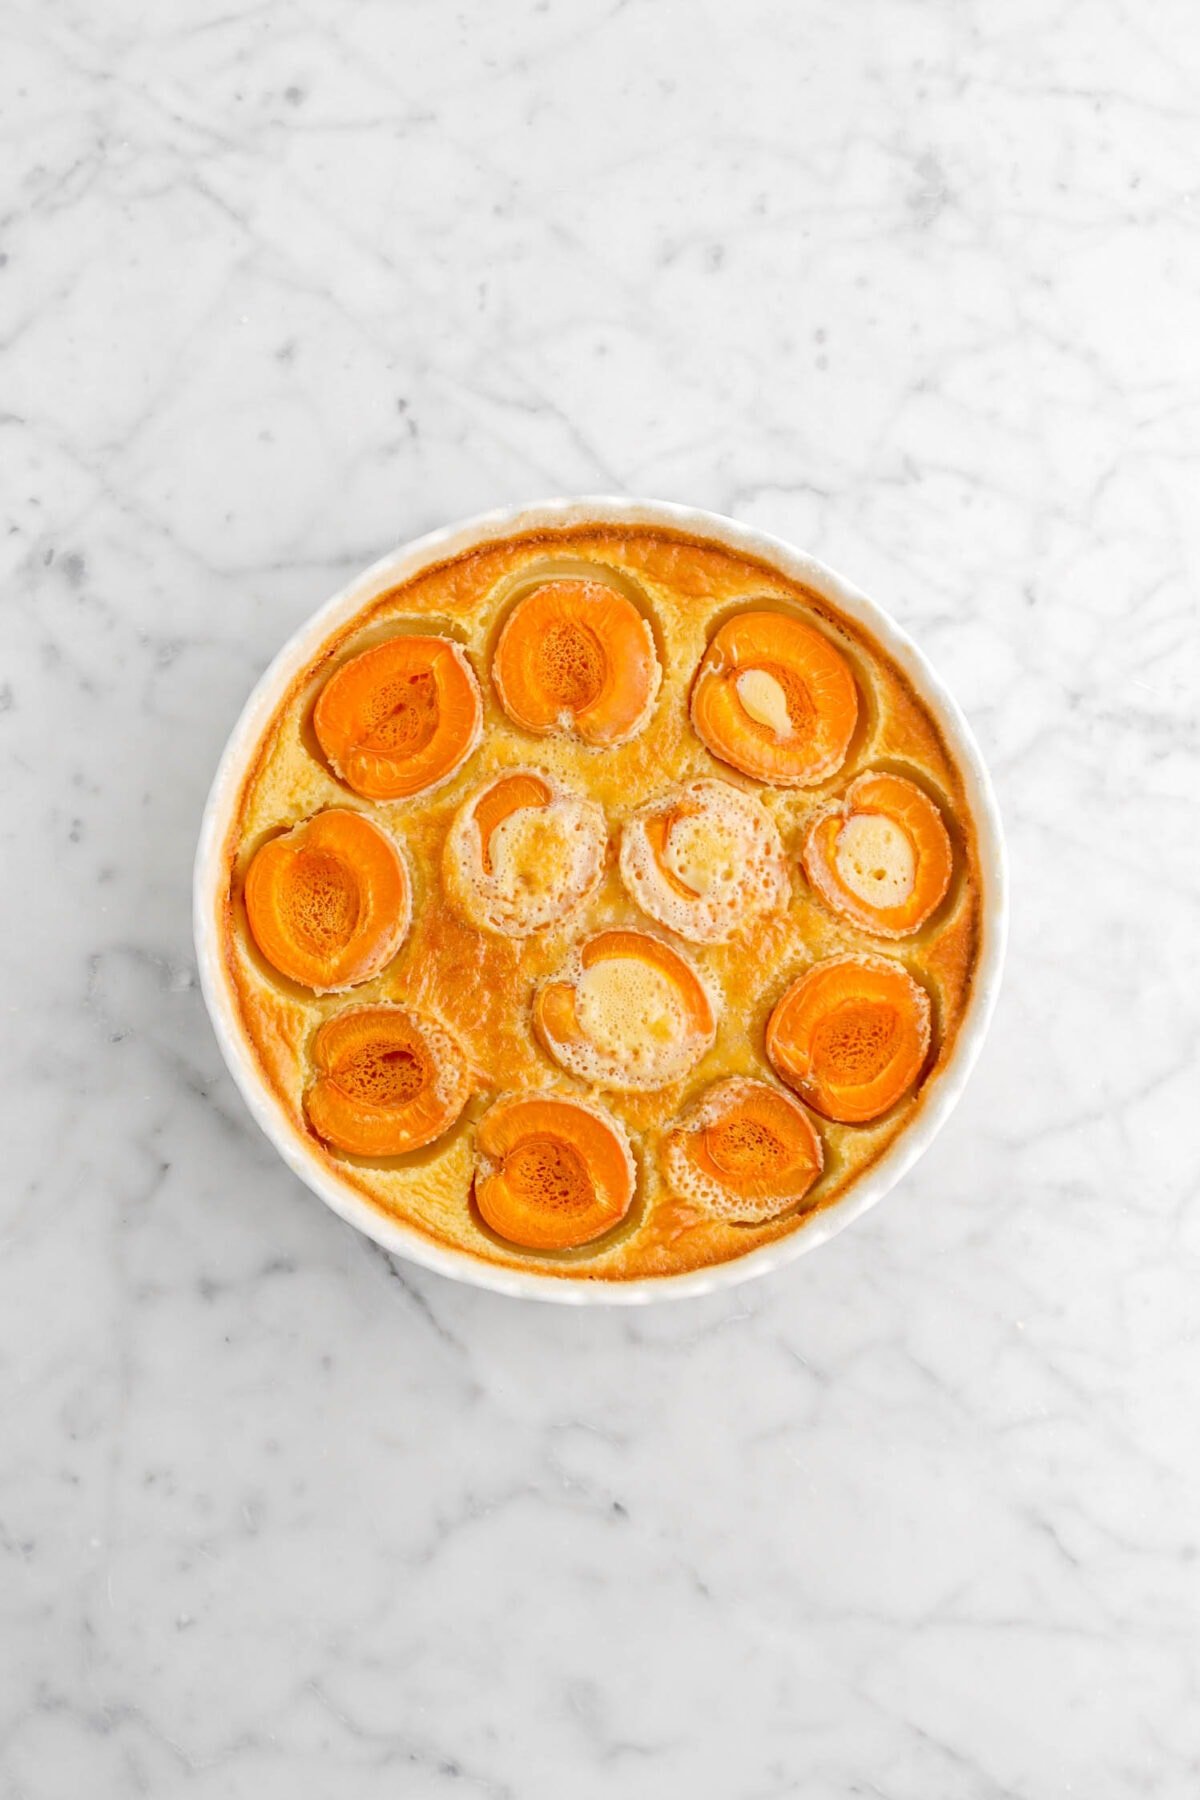 baked apricot clafoutis on marble surface